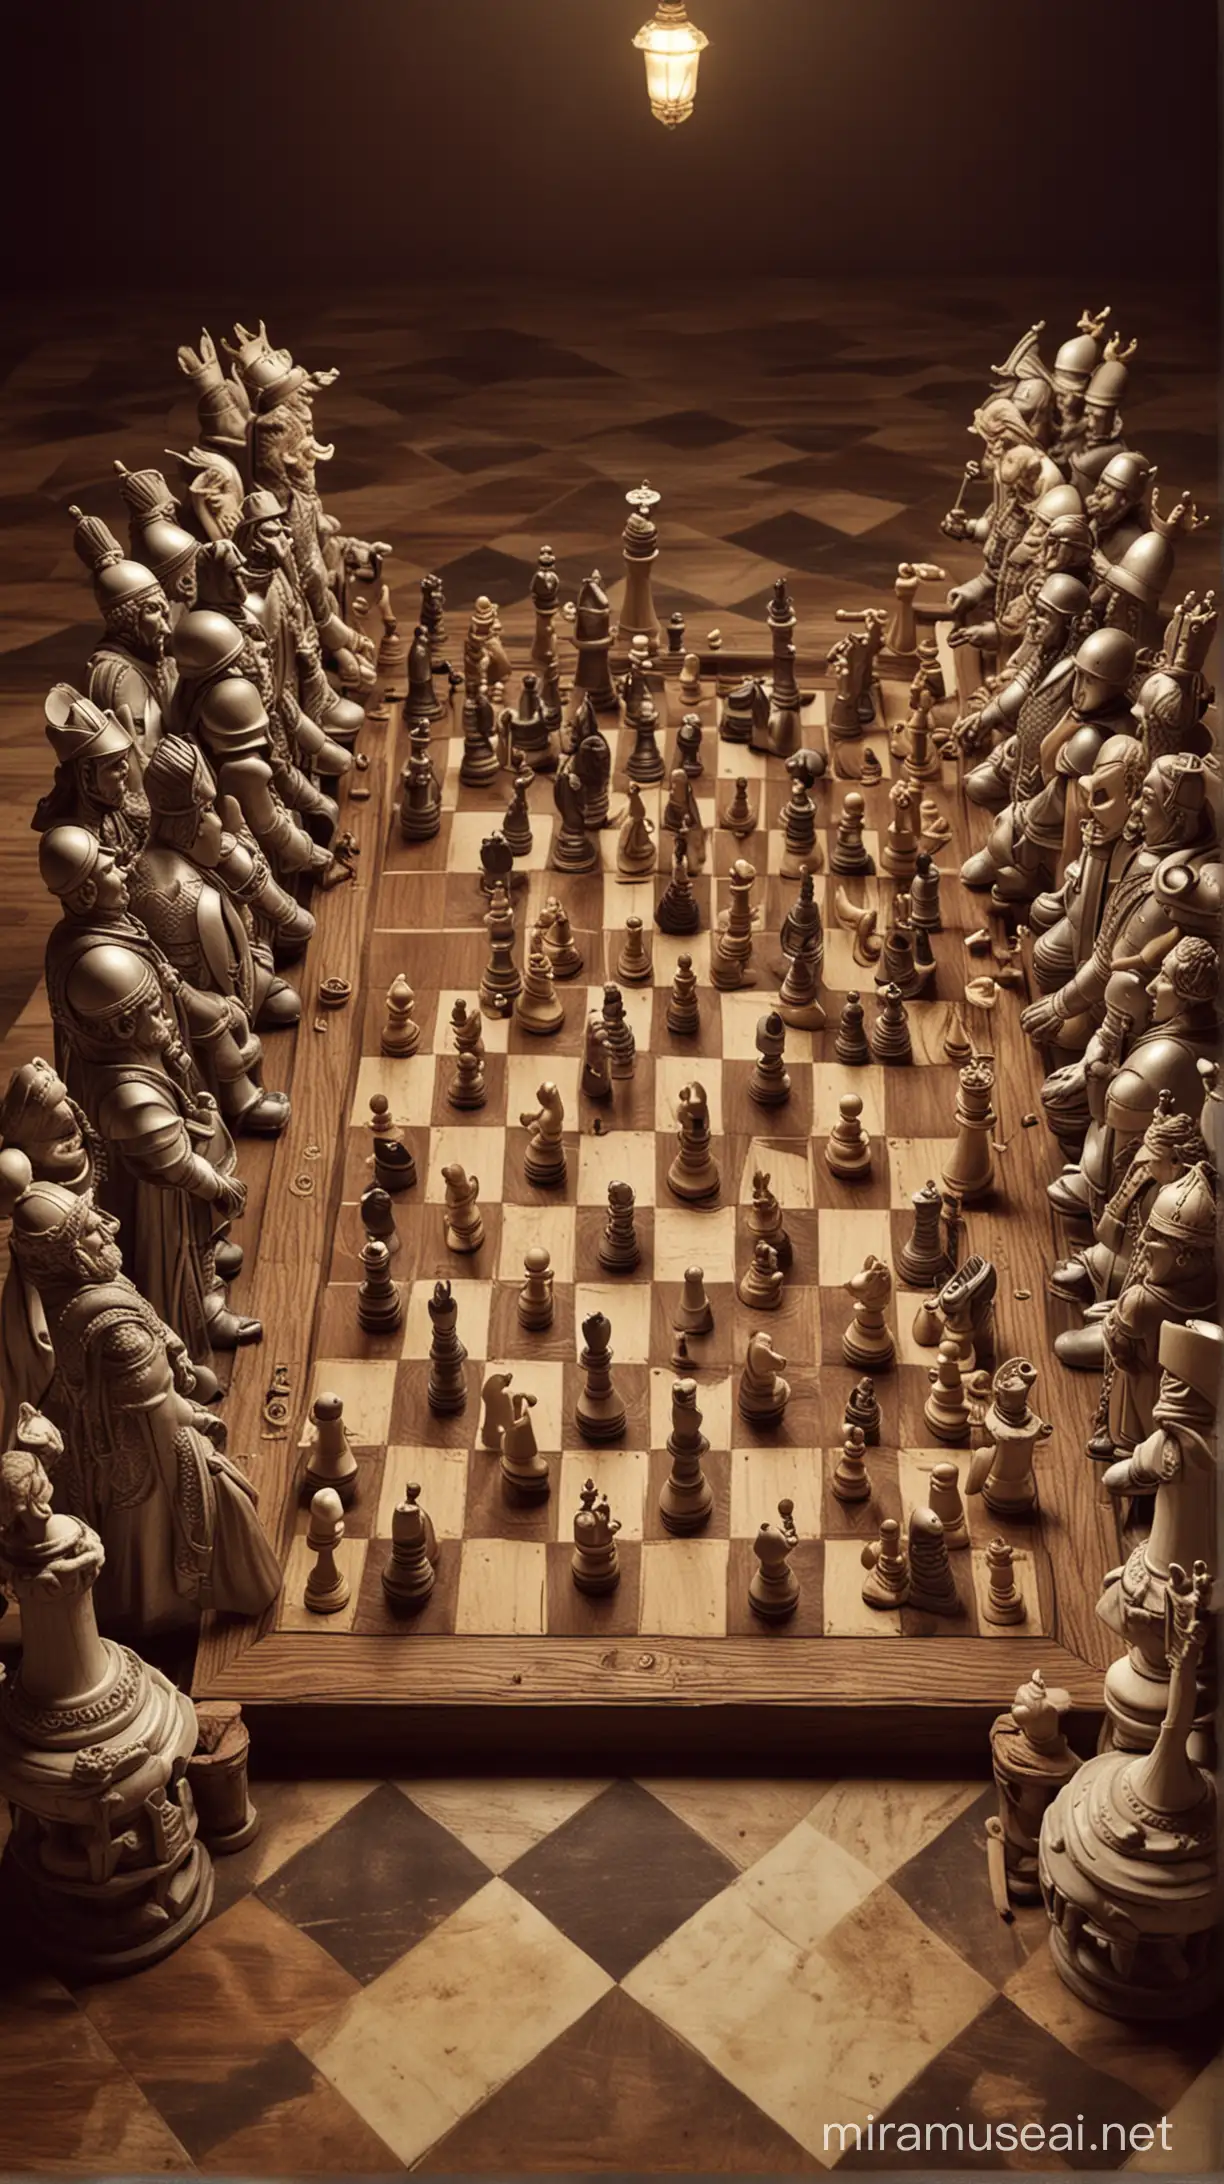 In a 9x16 image, depict a scene where various chess pieces engage in a hilariously animated conversation. Let the humor flow freely as the characters, each representing their respective roles on the chessboard, engage in witty banter, puns, and unexpected interactions. Whether it's the pawns gossiping, the knights trading jokes, the bishops engaging in a philosophical debate, or the kings and queens discussing the latest royal scandal, let the comedic possibilities of these regal characters shine. Be creative with their expressions, body language, and surroundings to convey the jovial atmosphere of this chess comedy club